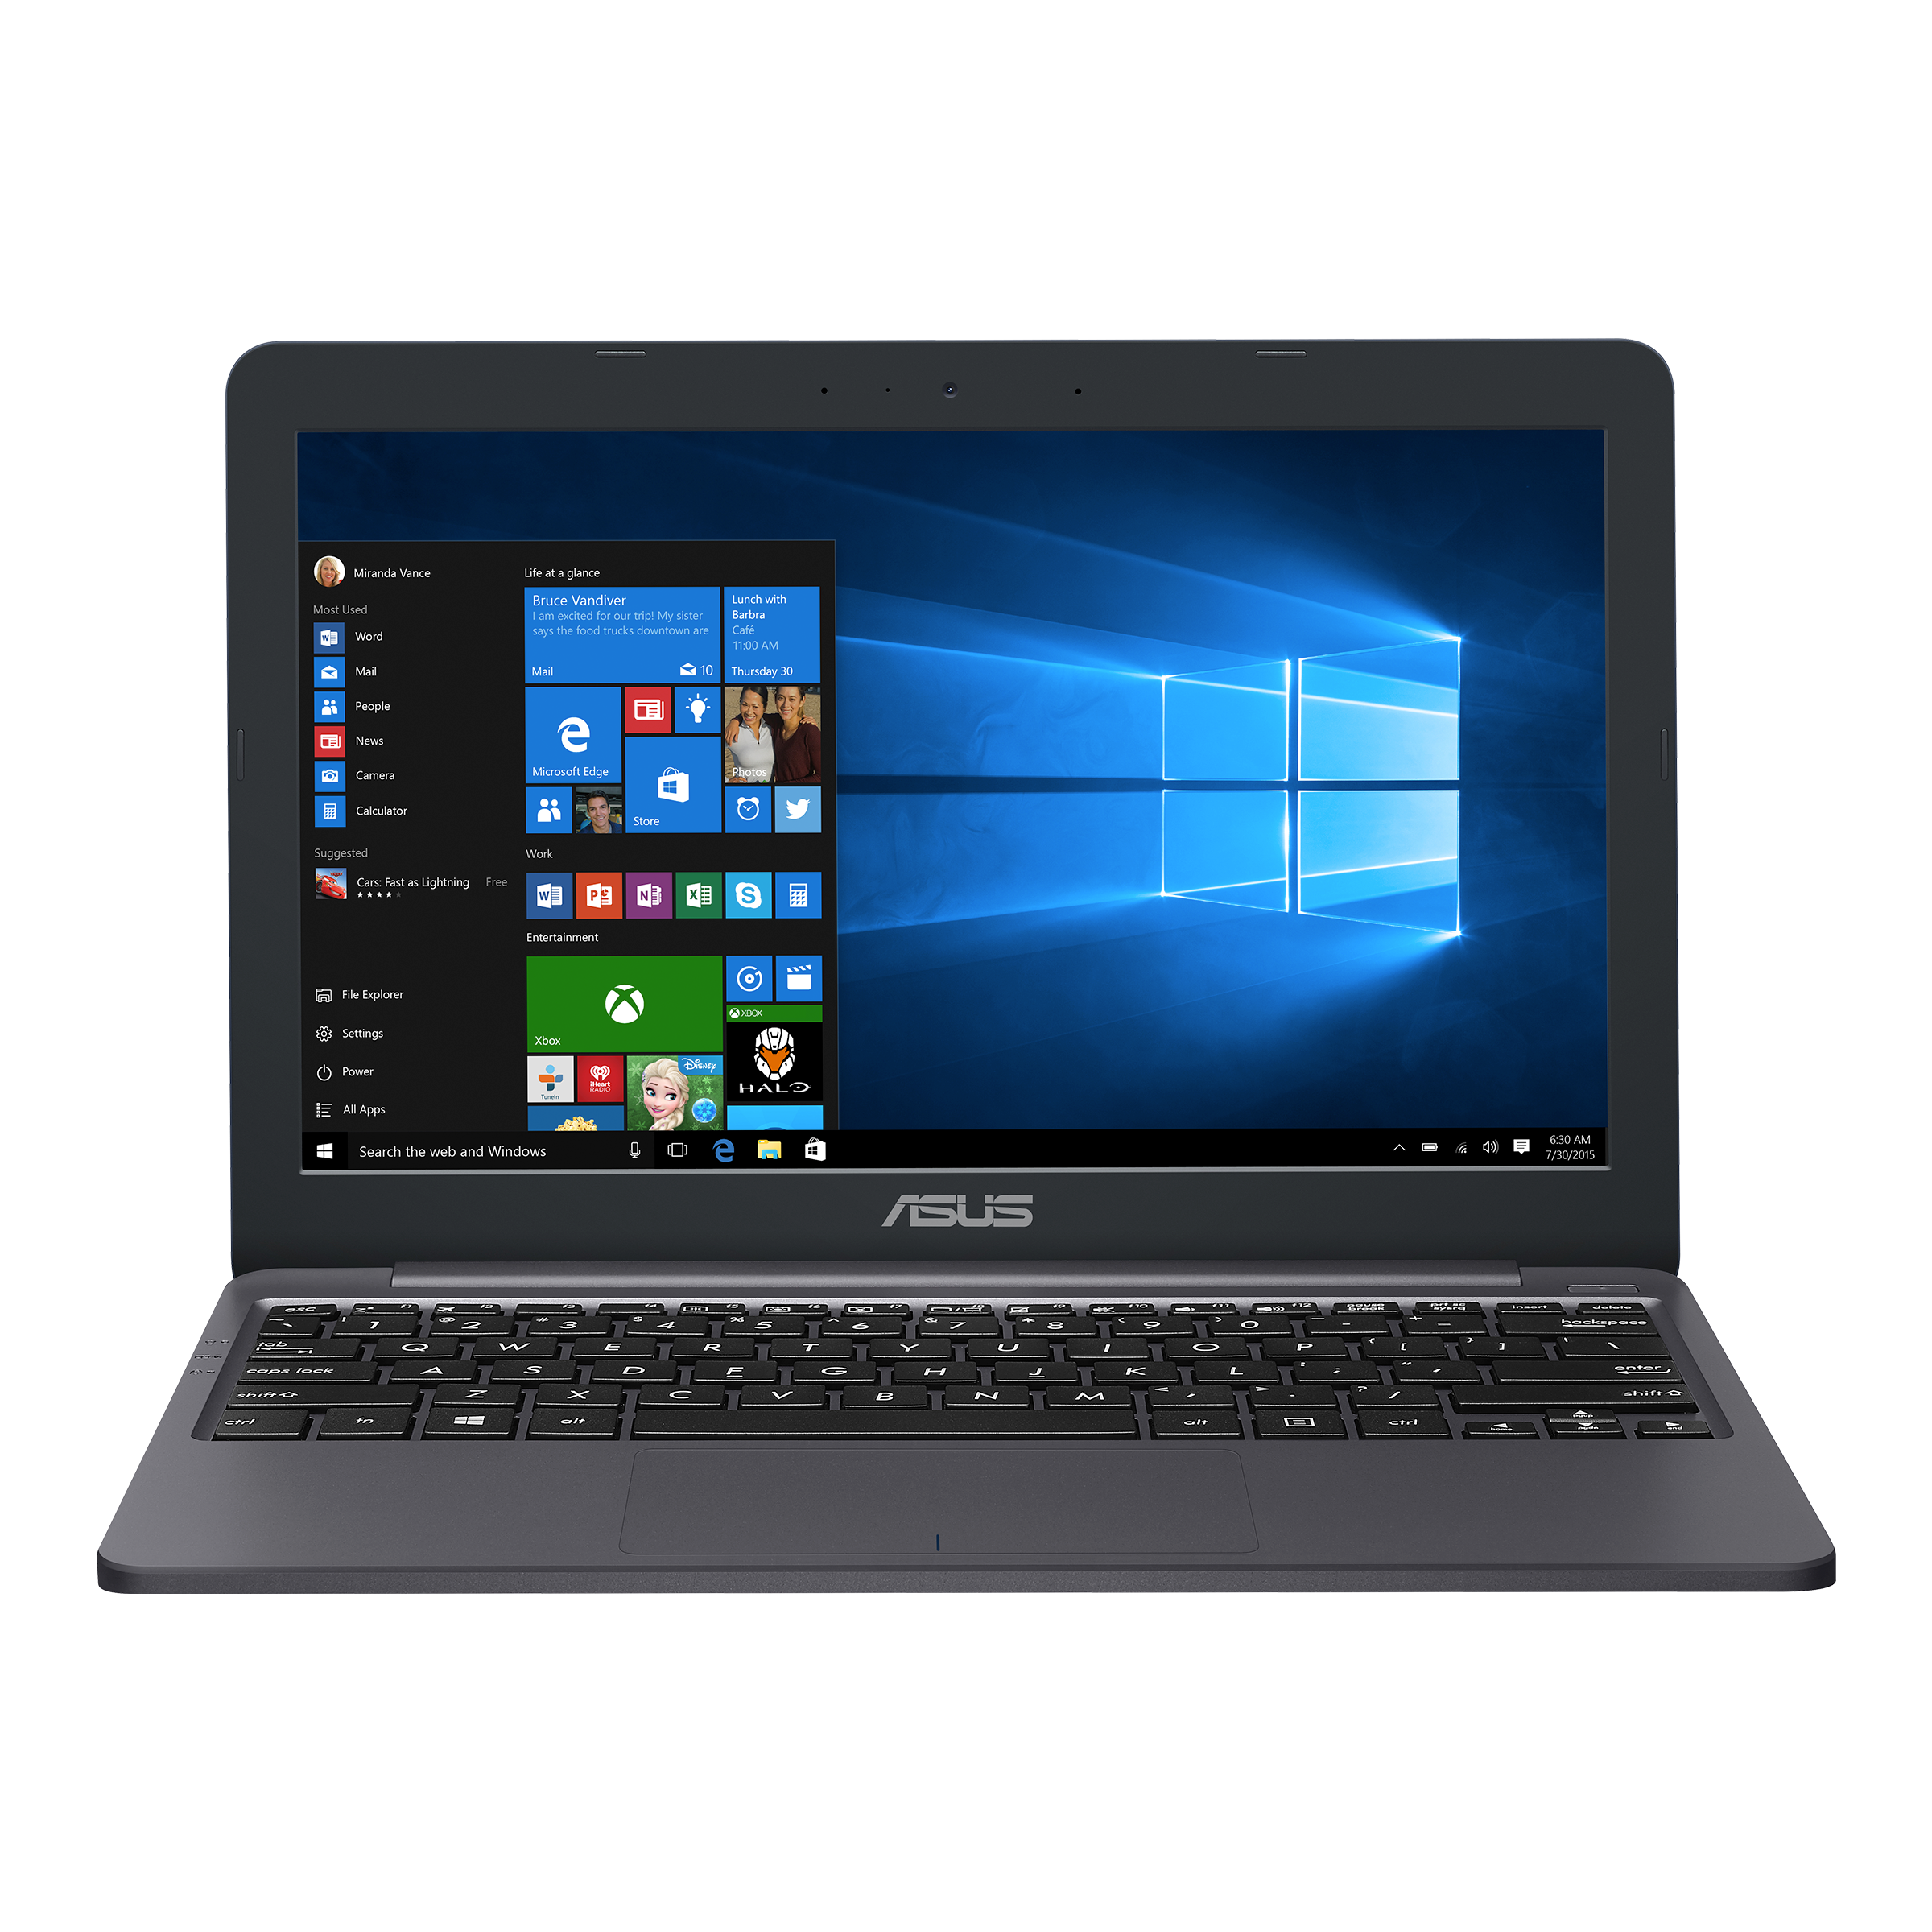 ASUS E203 - Tech Specs｜Laptops For Home｜ASUS Global